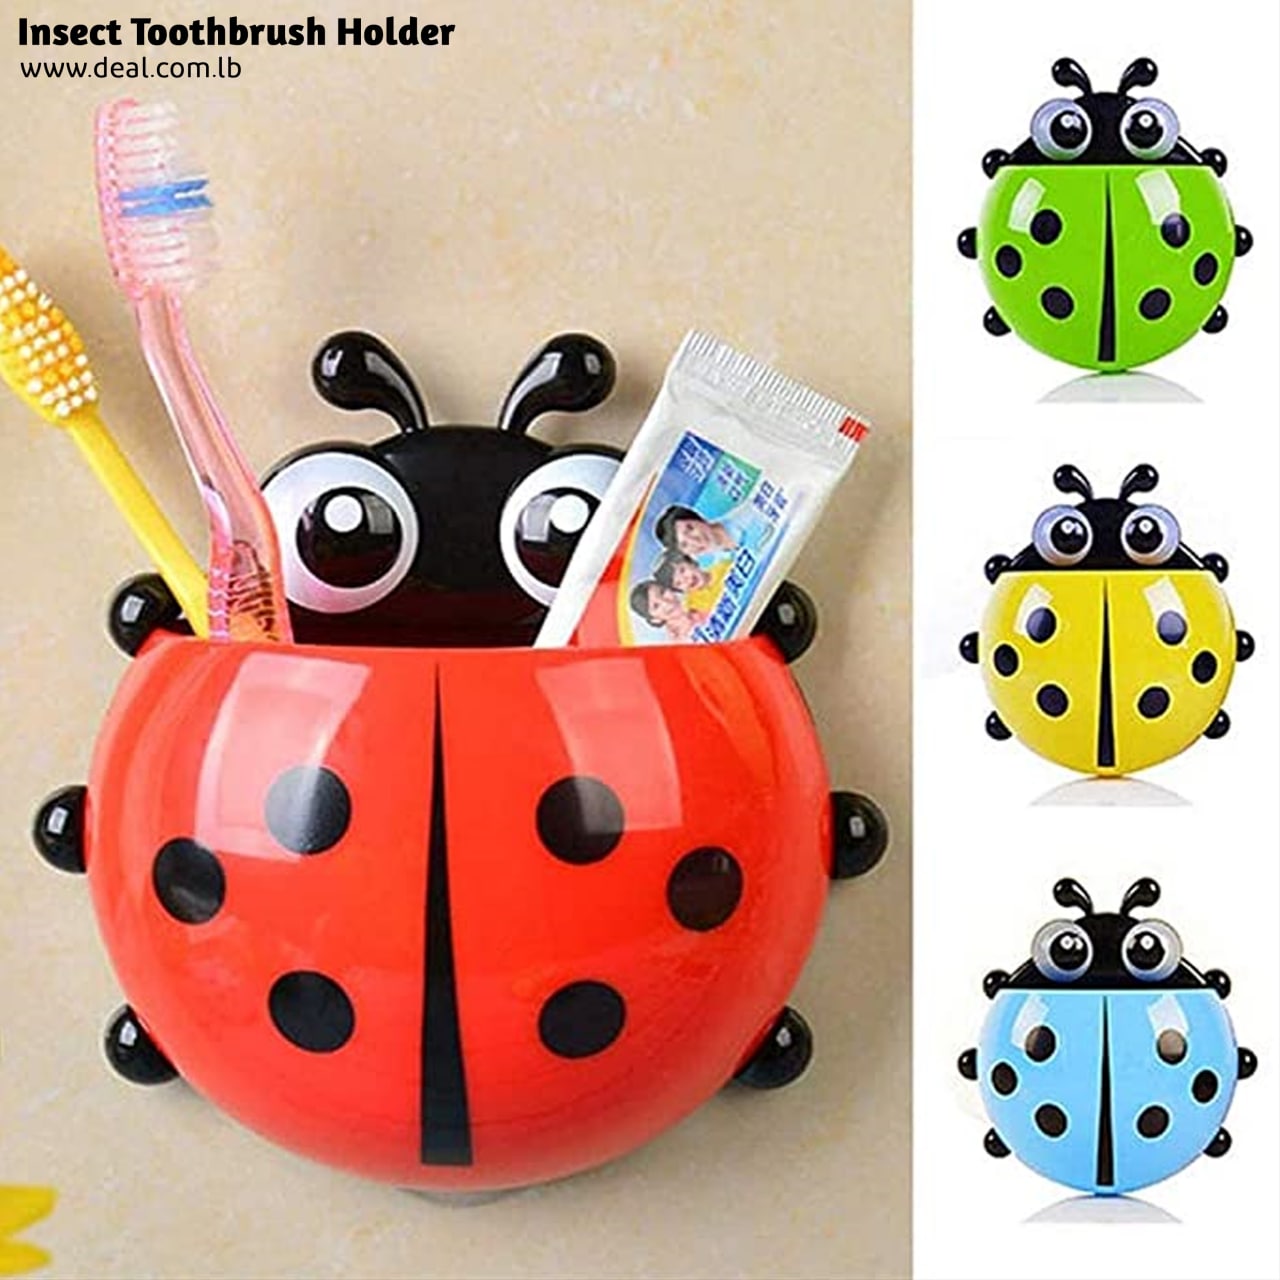 Insect Toothbrush Holder